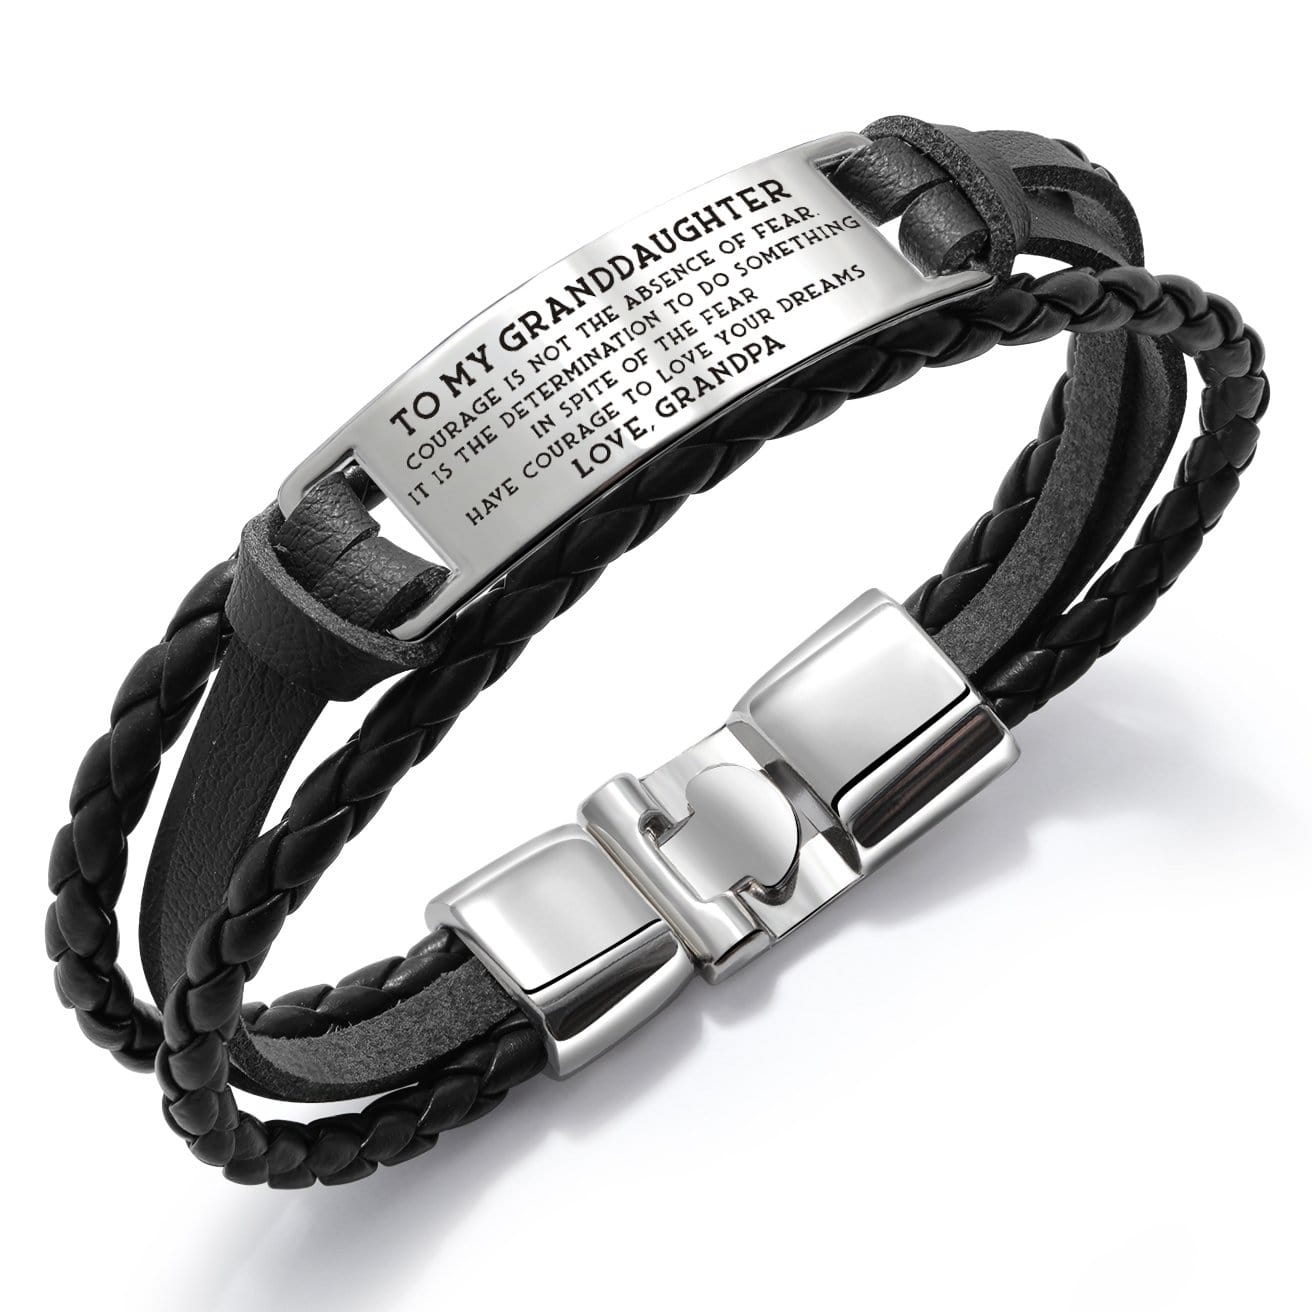 Bracelets Grandpa To Granddaughter - To Love Your Dreams Leather Bracelet Black GiveMe-Gifts